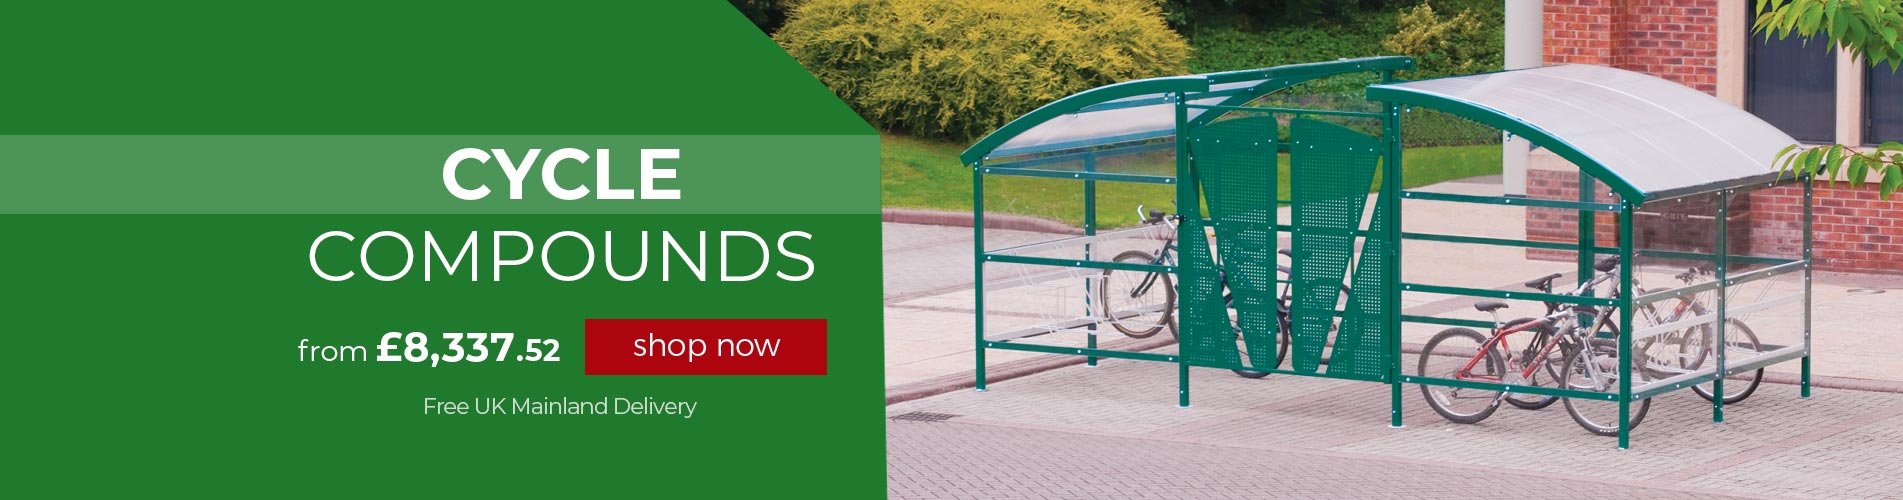 Closed Cycle Shelter & Cycle Compounds